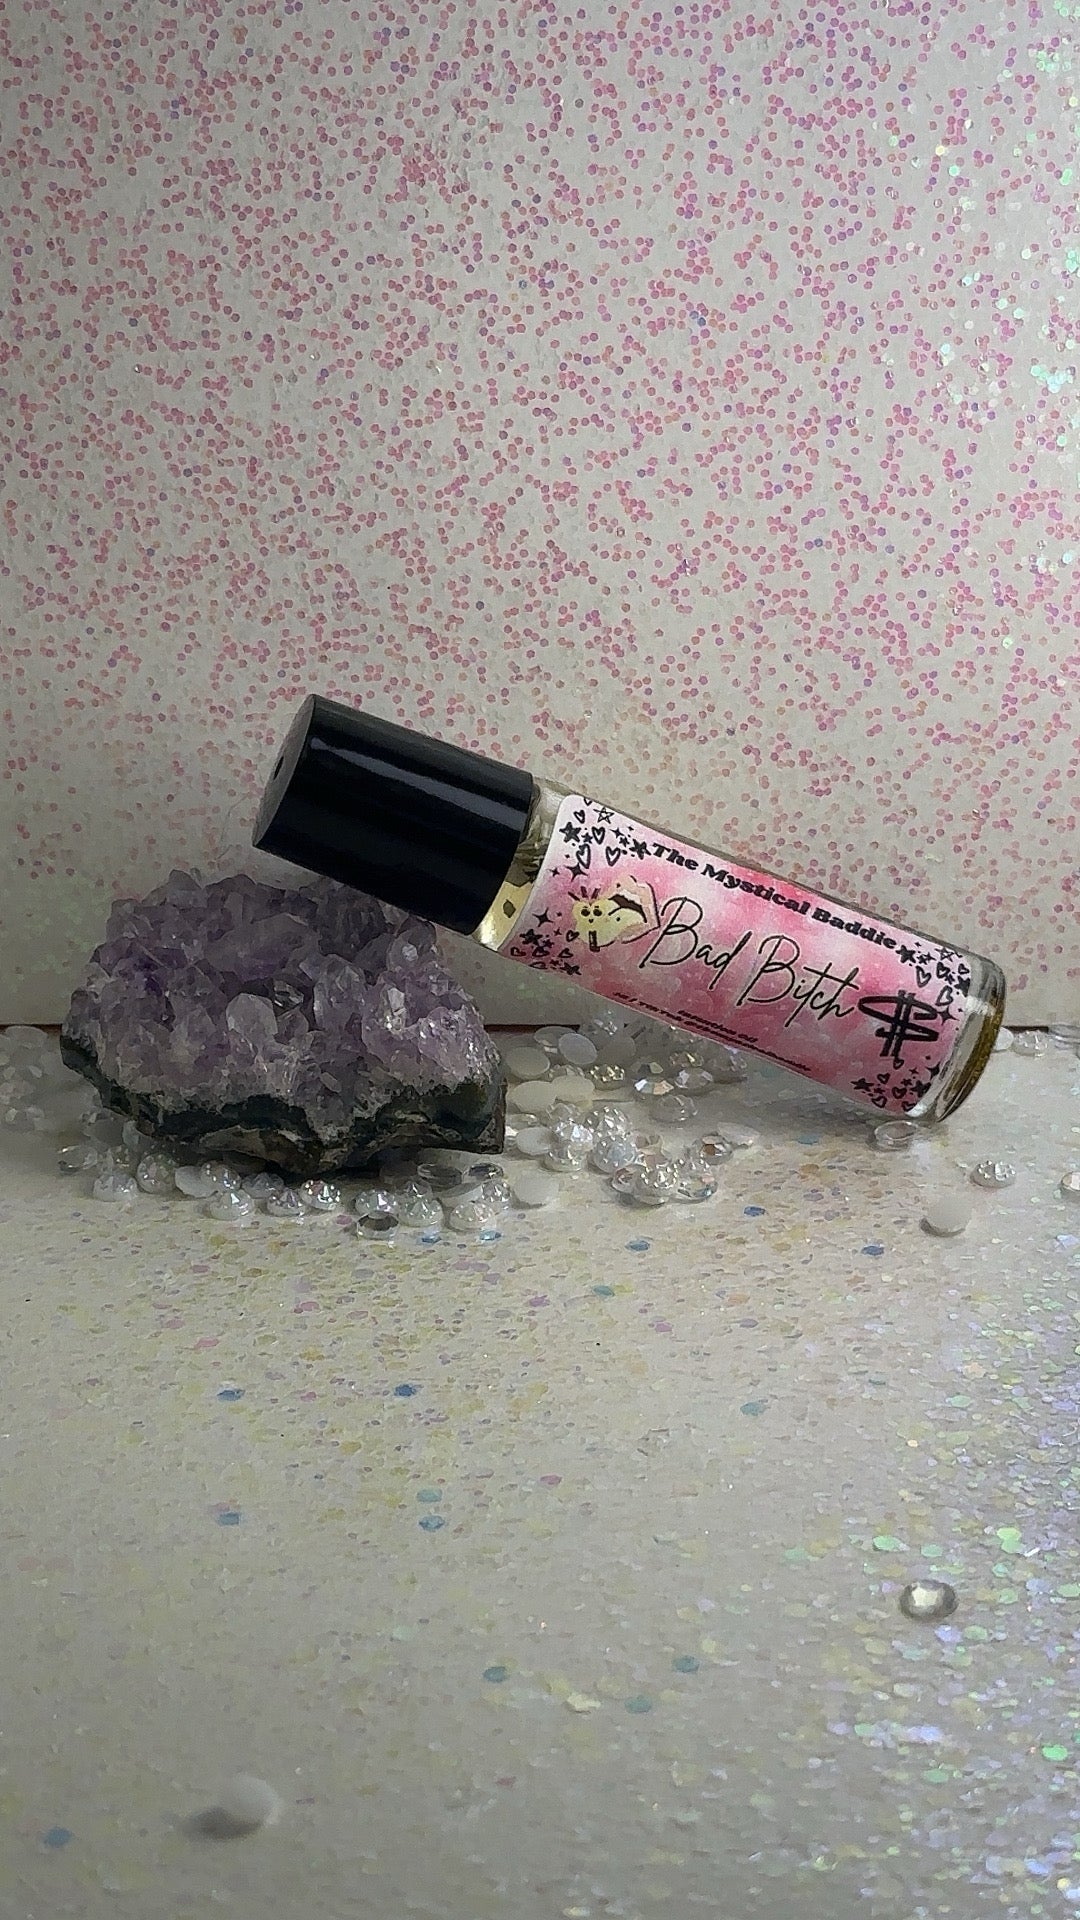 Bad B*tch Intention Oil for Confidence, Power, Strength, Influence & Success